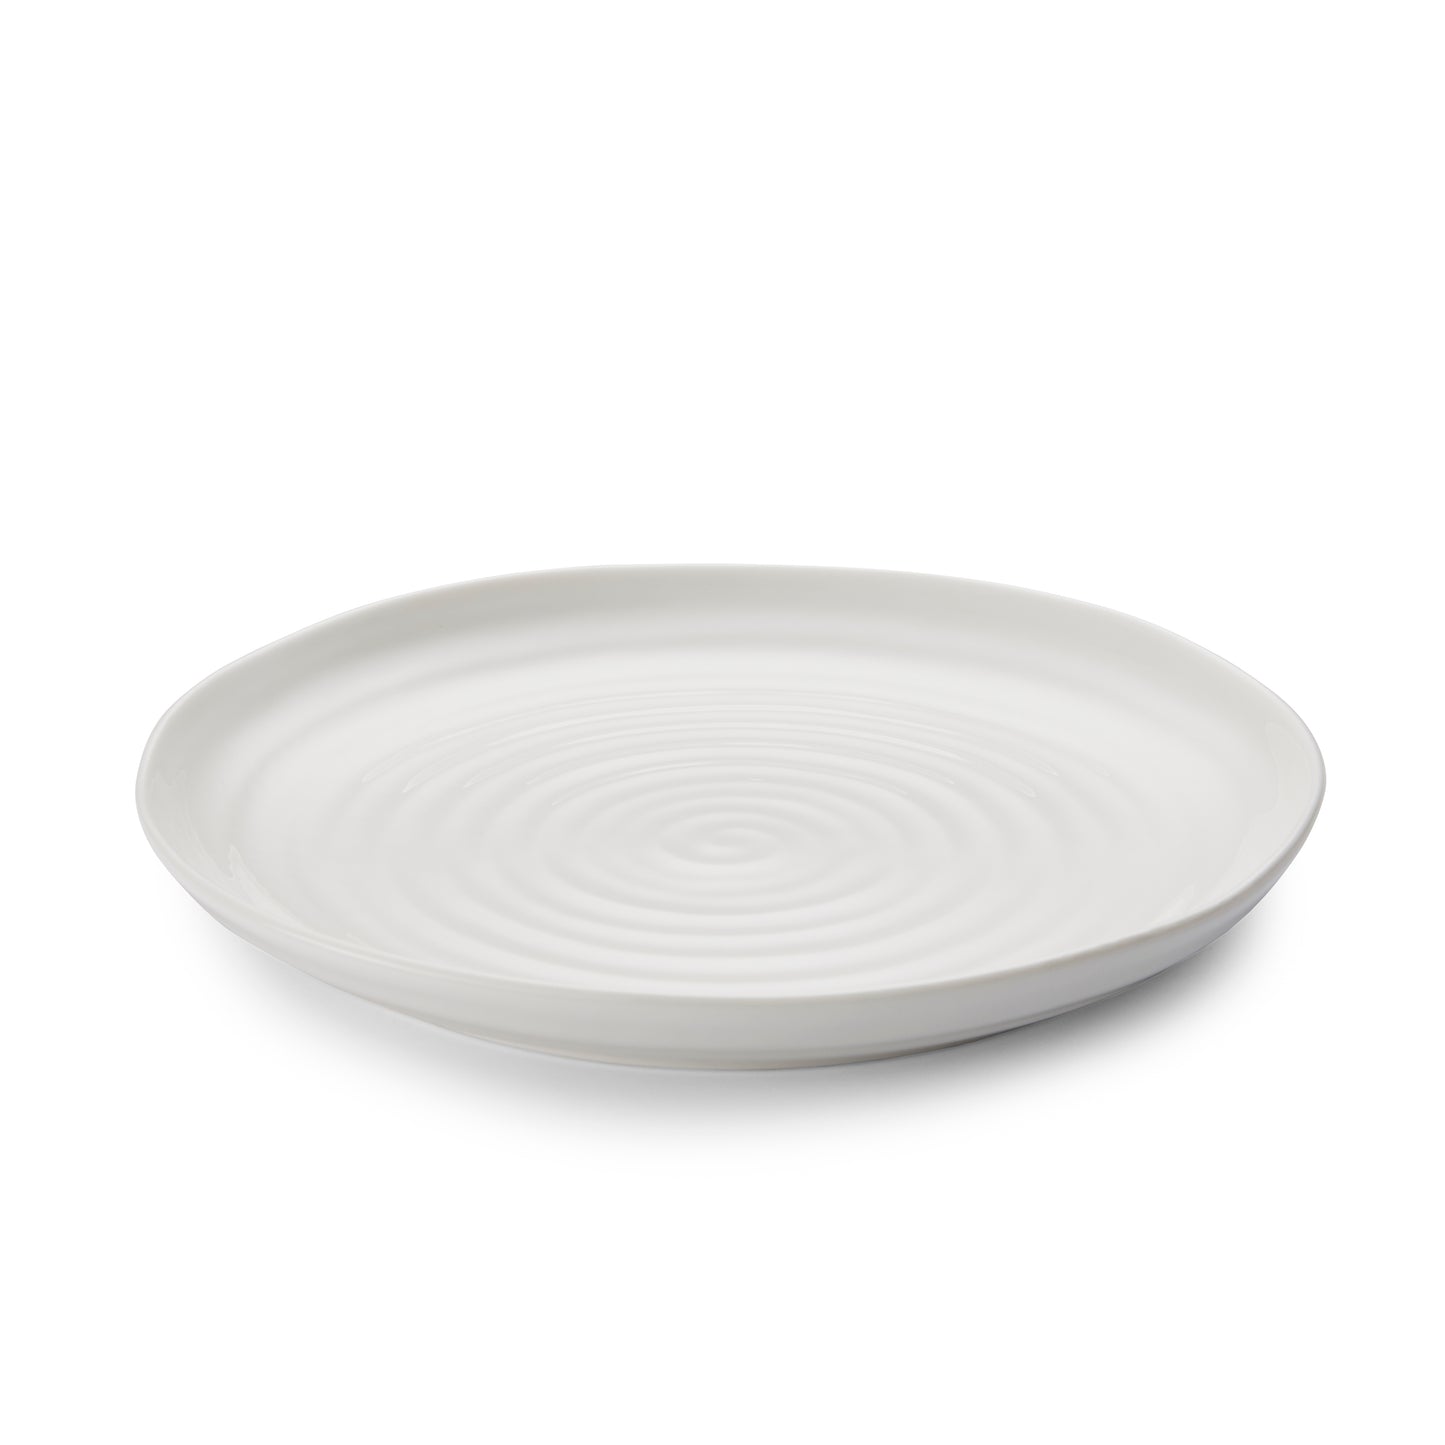 Sophie Conran for Portmeirion White Round Coupe Buffet Plates Set of 4